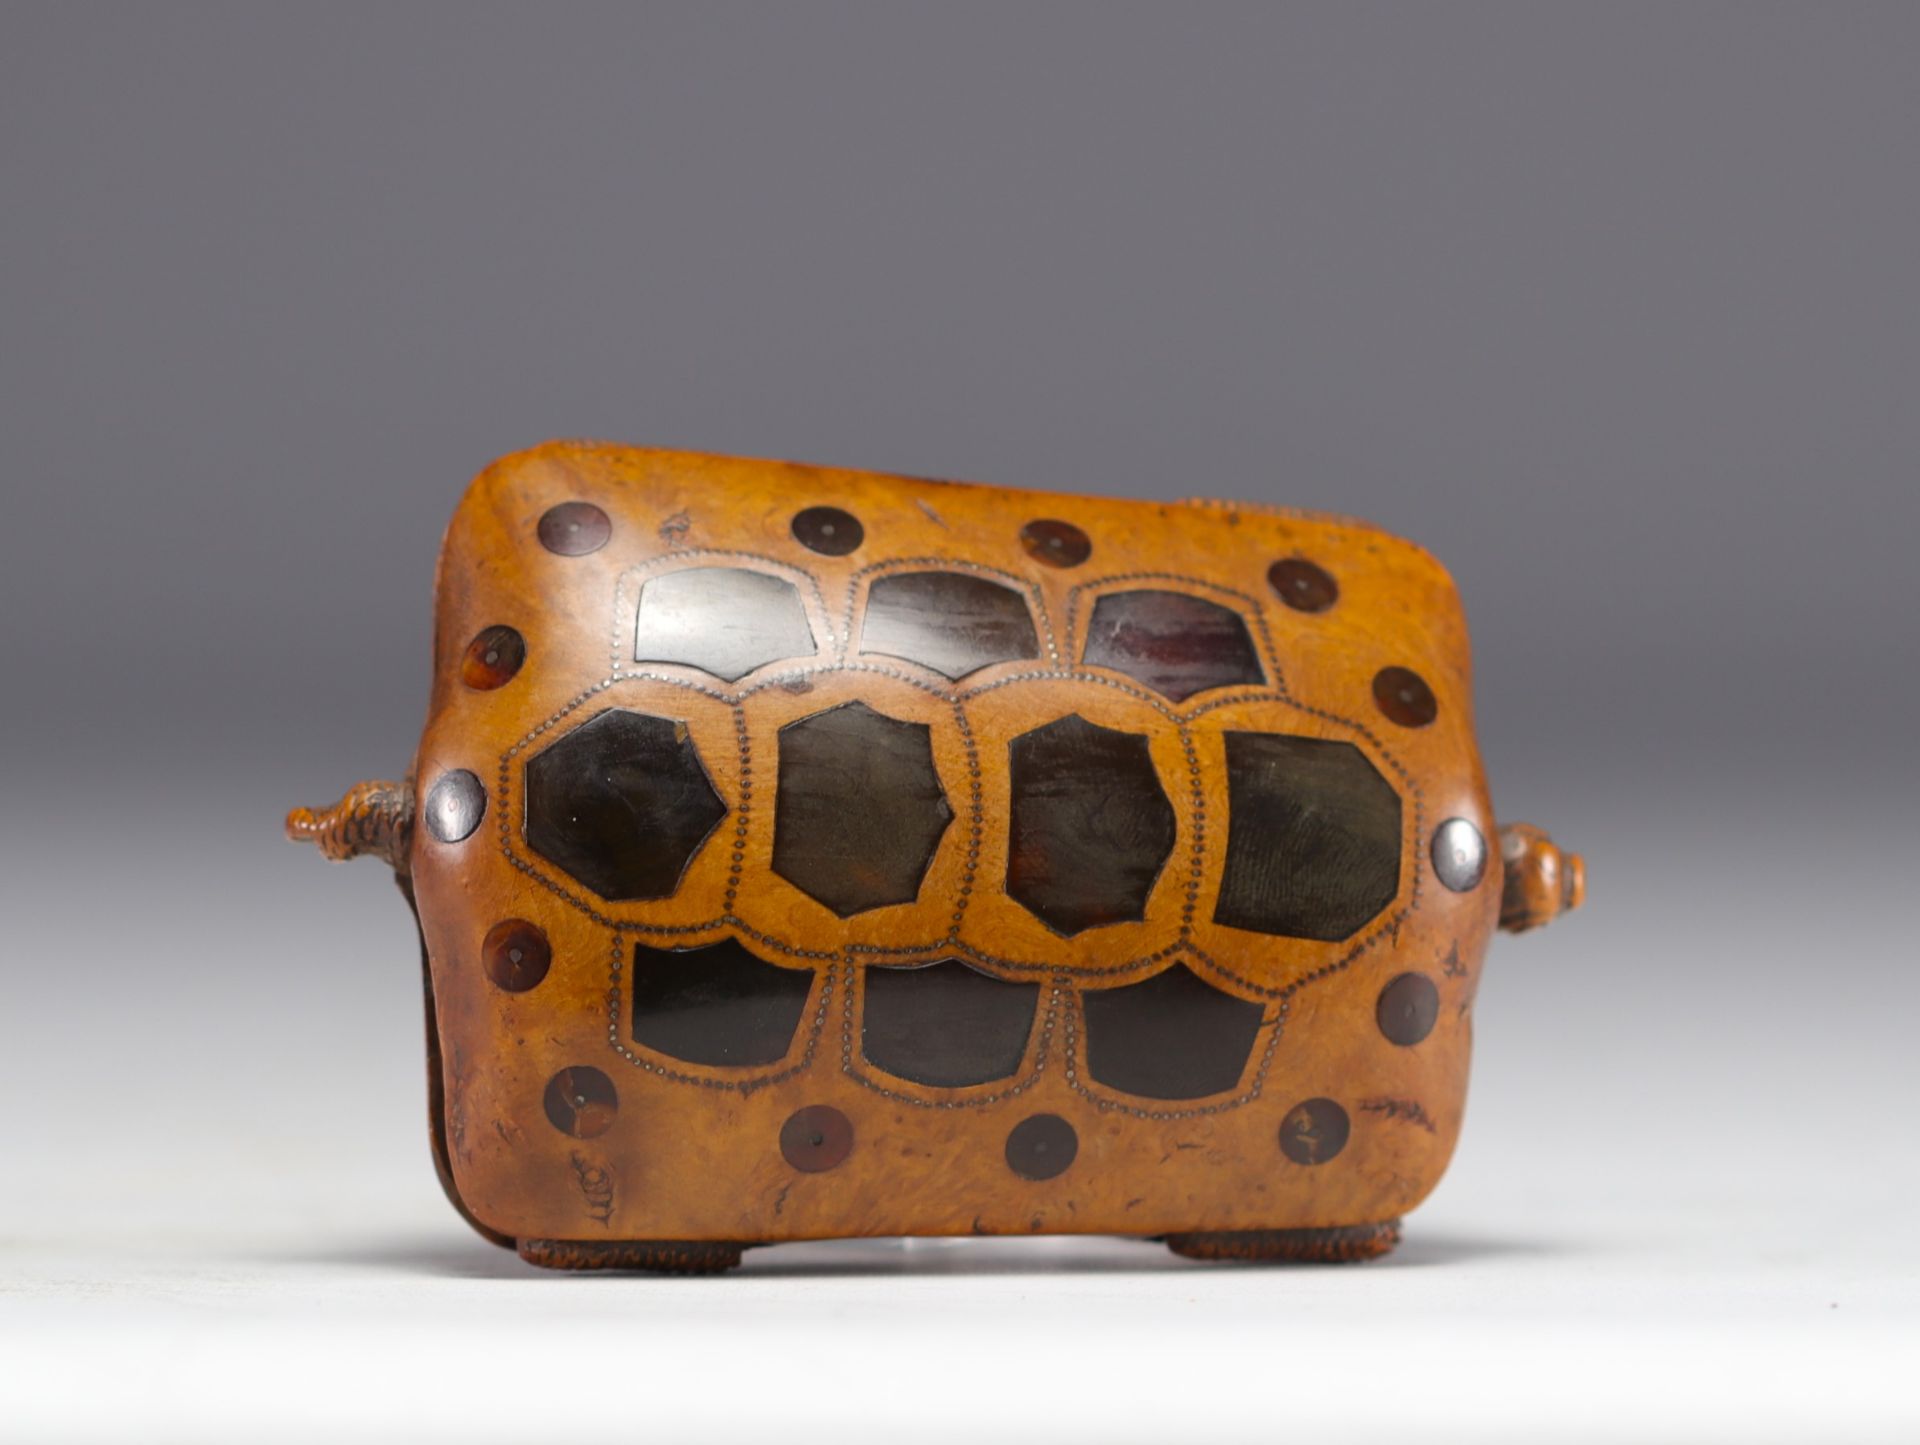 Rare snuff box in the shape of a turtle carved with inlays and nails, 19th century - Image 2 of 8